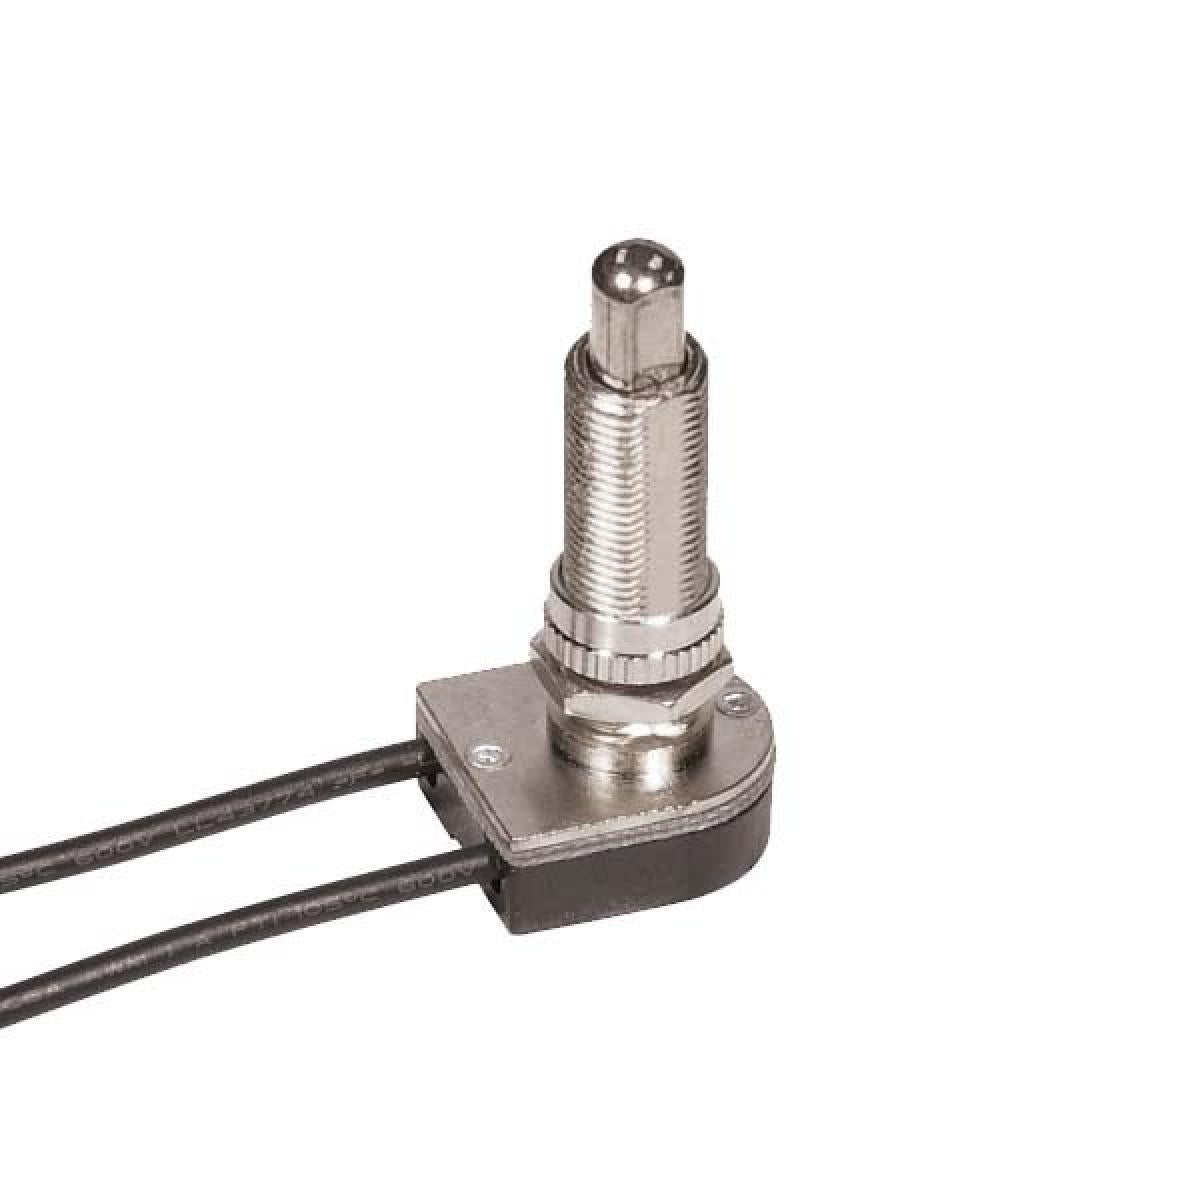 Satco 80-1368 On-Off Metal Push Switch 1-1/8" Metal Bushing Single Circuit 6A-125V, 3A-250V Rating 6" Leads Nickel Finish